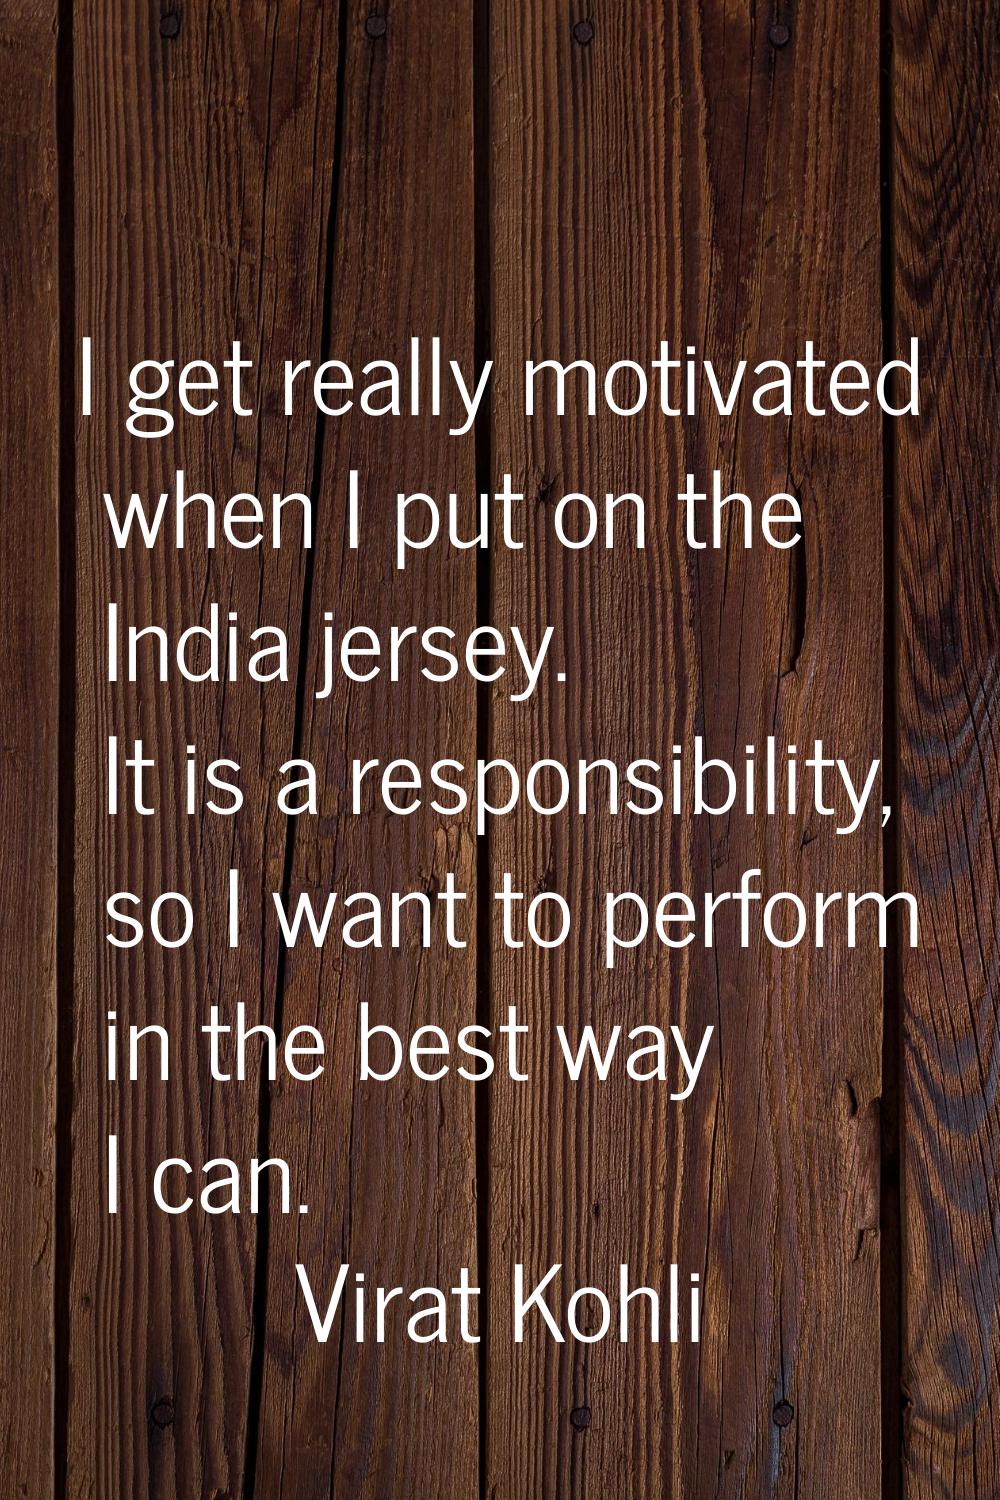 I get really motivated when I put on the India jersey. It is a responsibility, so I want to perform